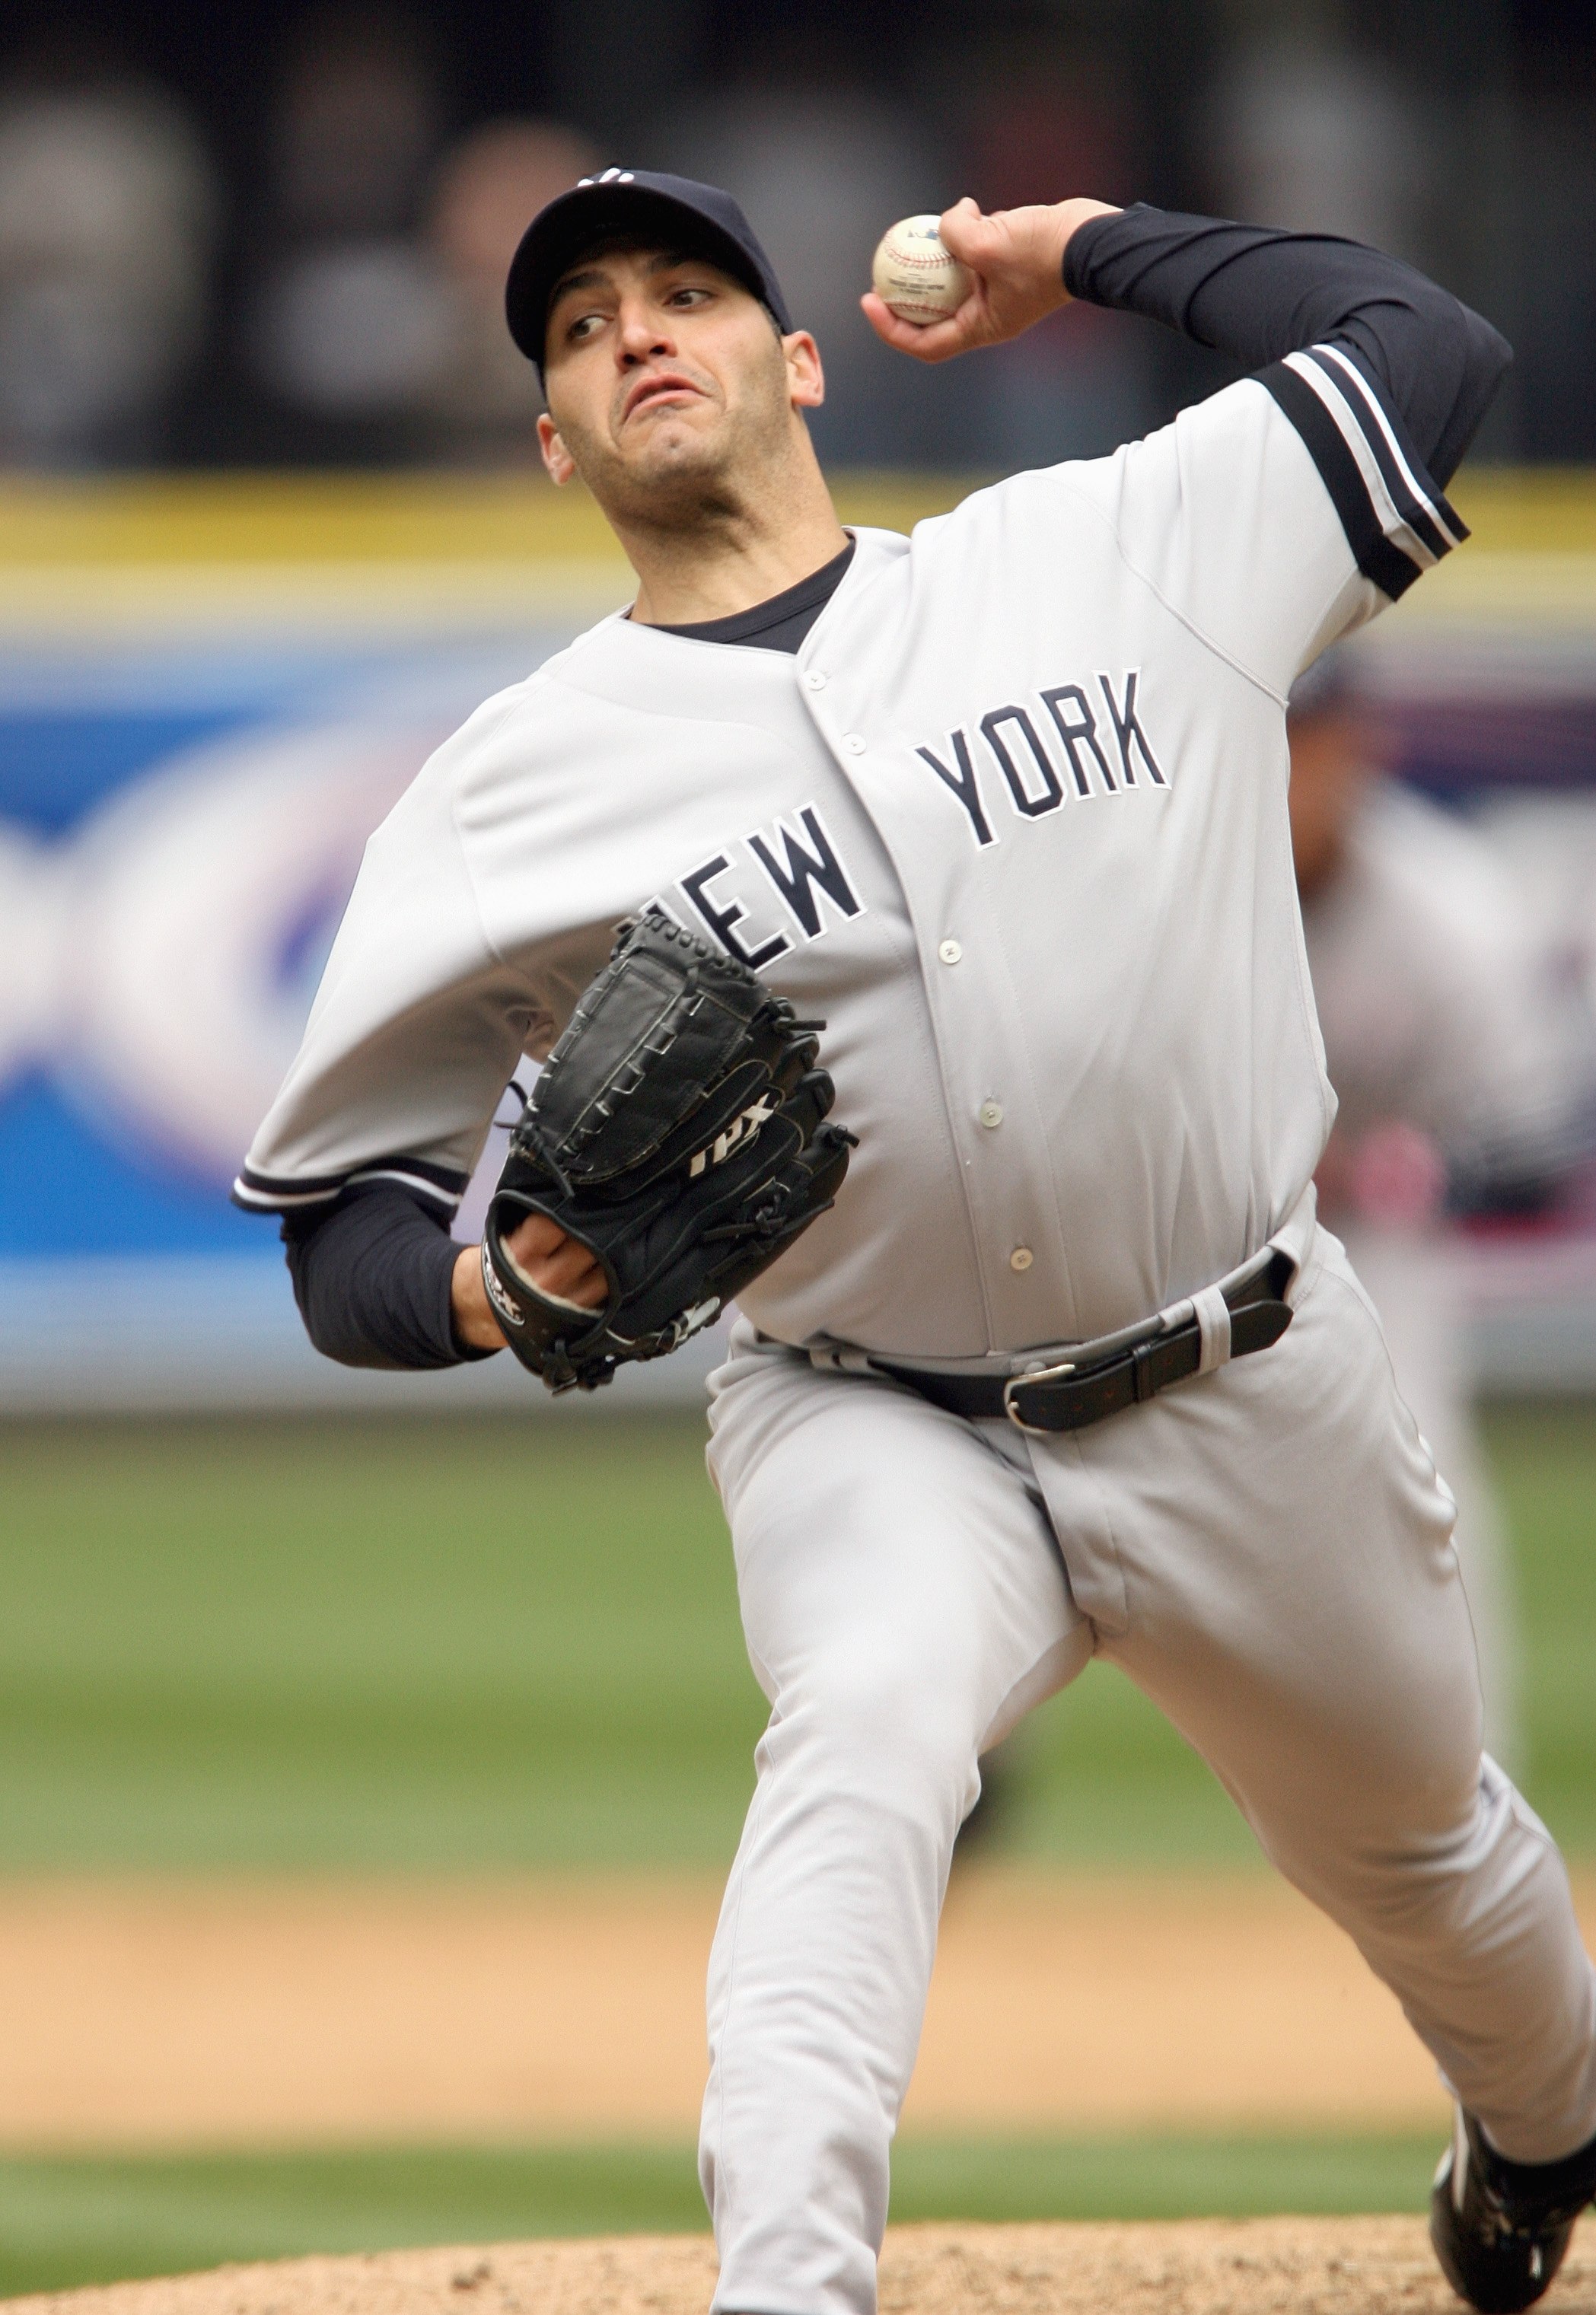 SEATTLE - MAY 13:  Andy Pettitte #46 of the New York Yankees delivers the pitch during the game against the Seattle Mariners on May 13, 2007 at Safeco Field in Seattle, Washington. (Photo by Otto Greule Jr/Getty Images)